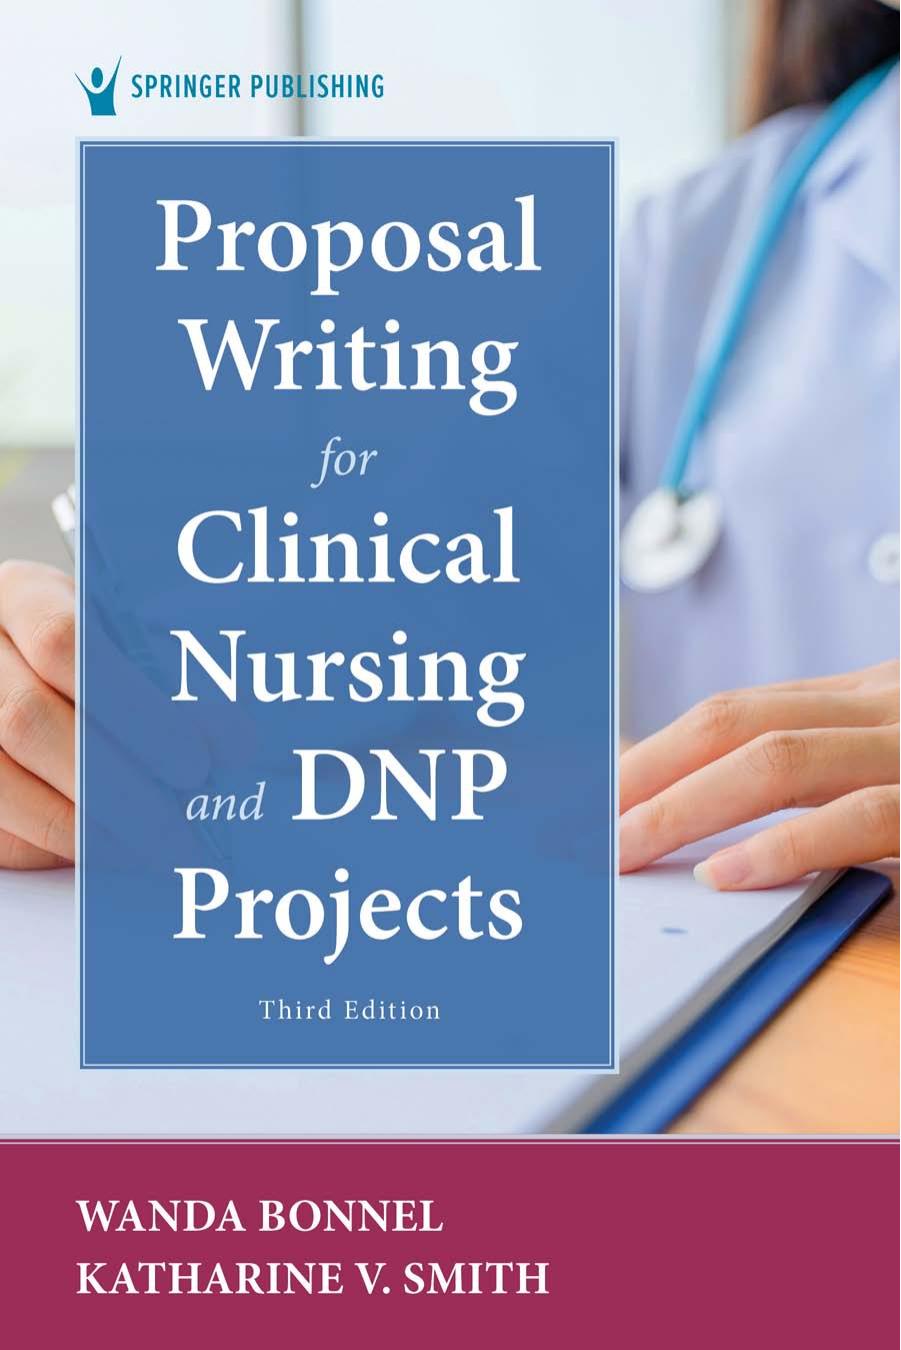 Proposal Writing for Clinical Nursing and DNP Projects, Third Edition